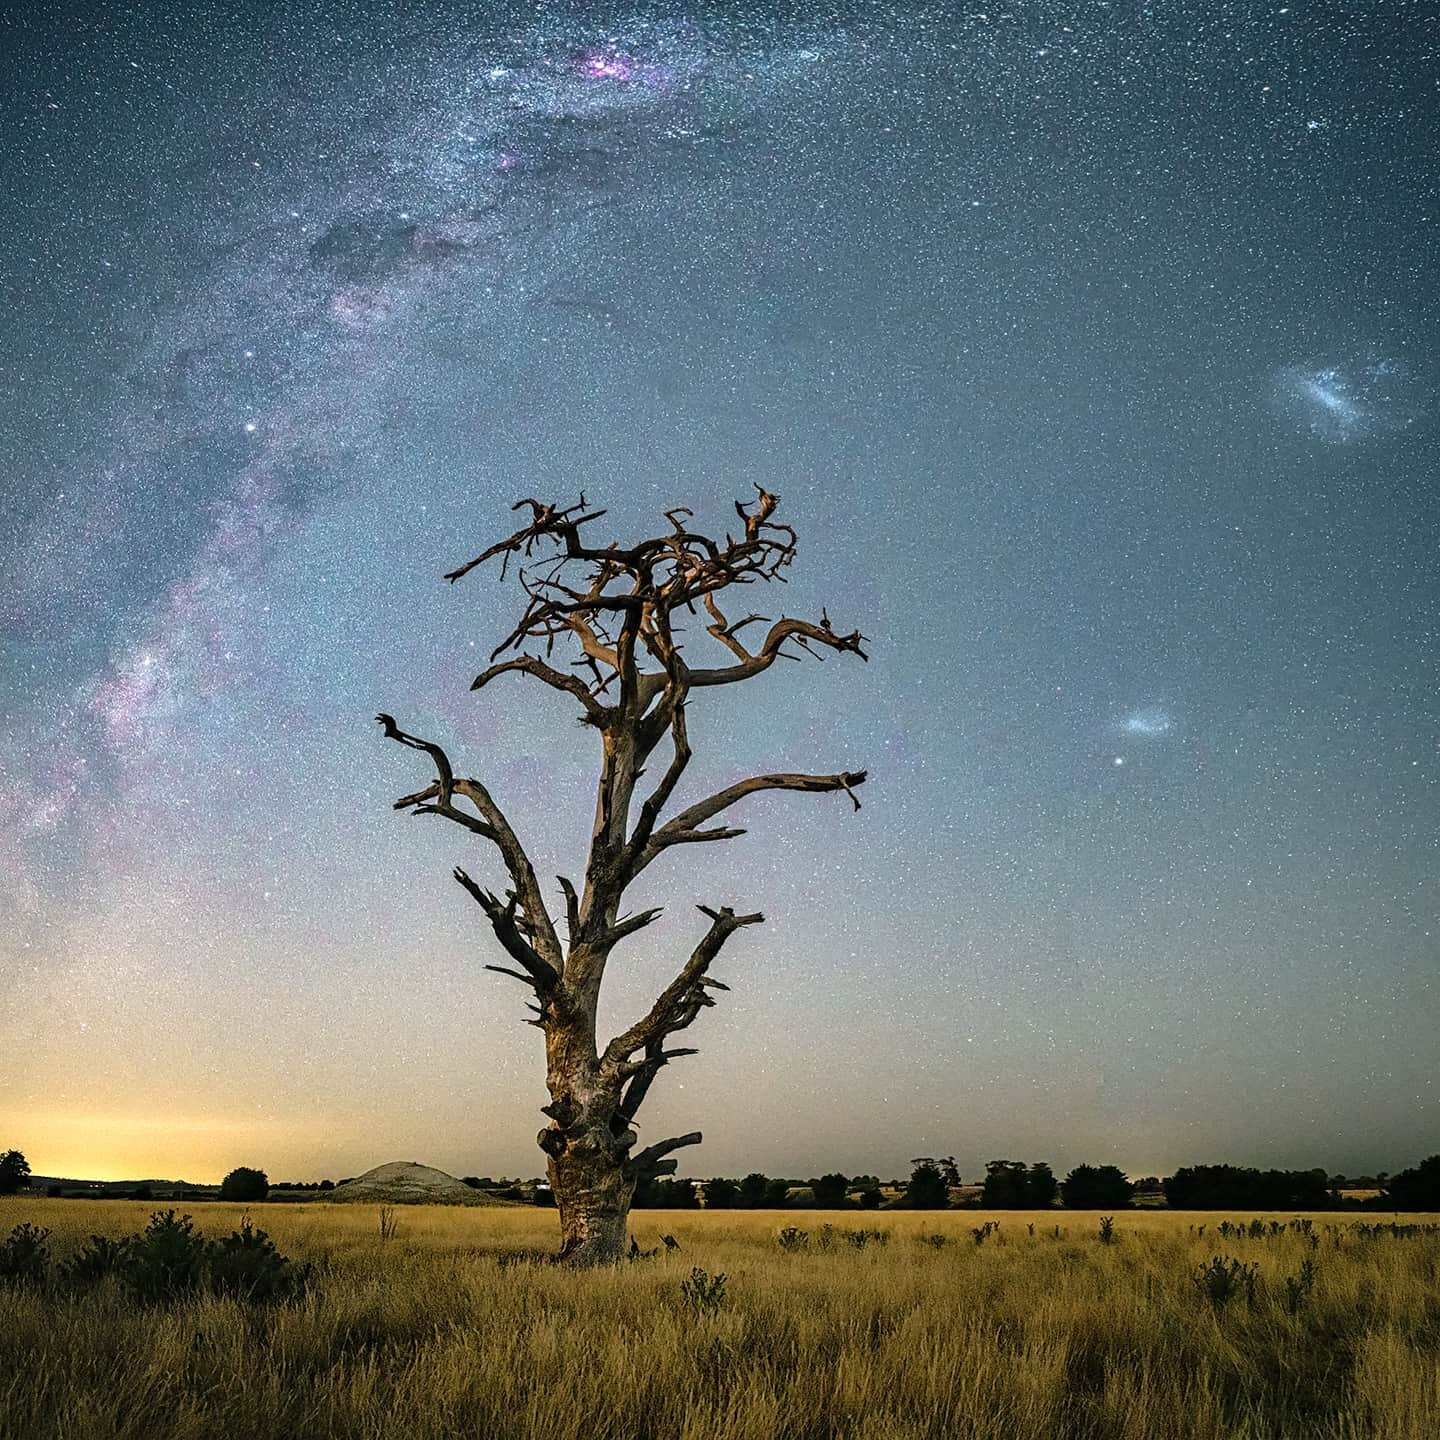 &quot;Southern Sky&quot;

An old dead cypress tree pointing out celestial objects in the Southern Hemisphere night sky. The Milky Way with the Southern Cross and Magellenic Clouds, amazing to witness and capture.